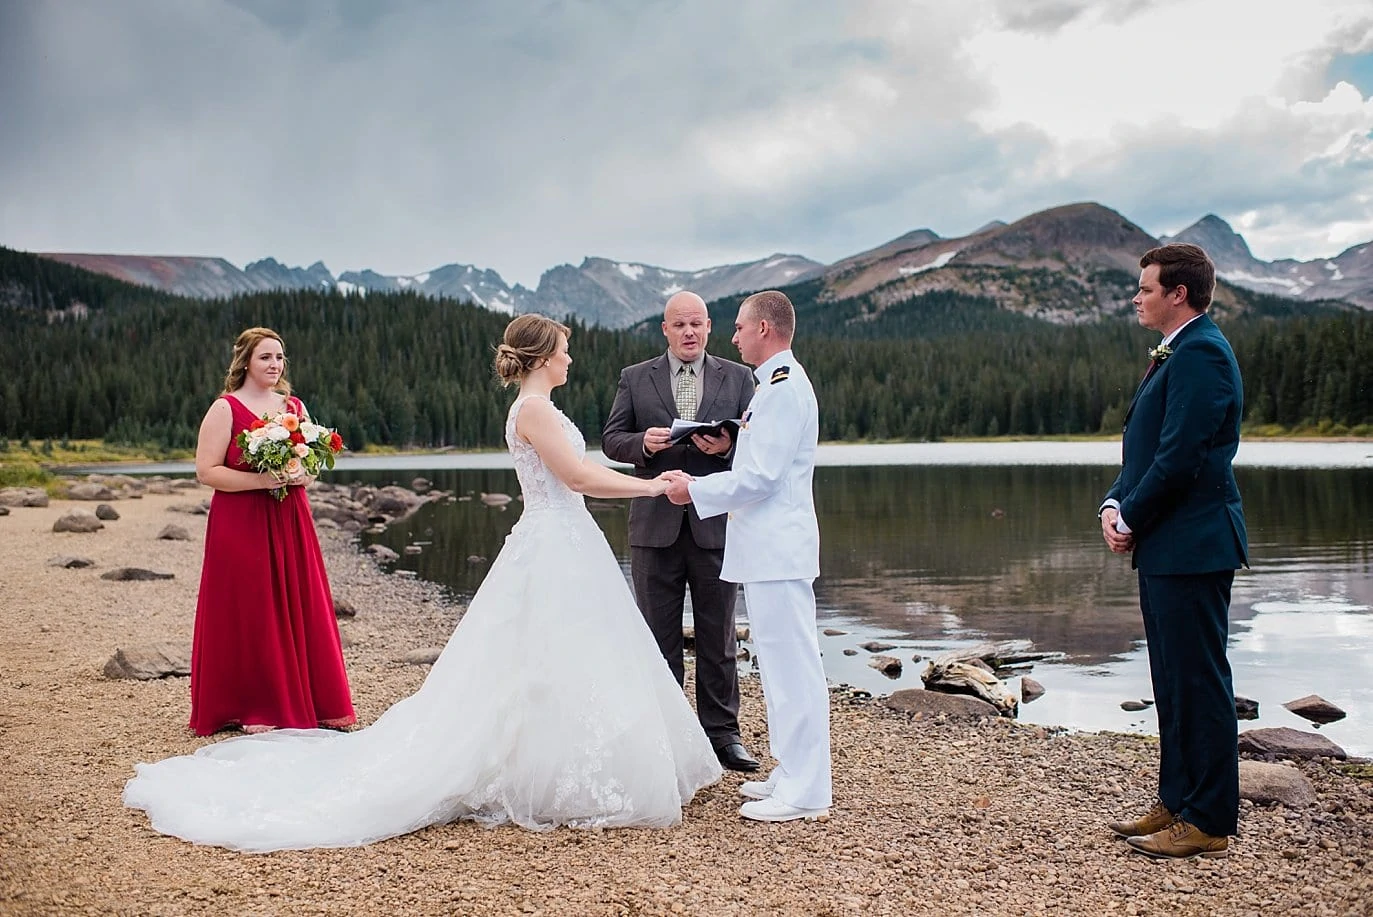 bride and groom elope outdoors in Colorado mountains by Colorado Wedding photographer, Jennie Crate